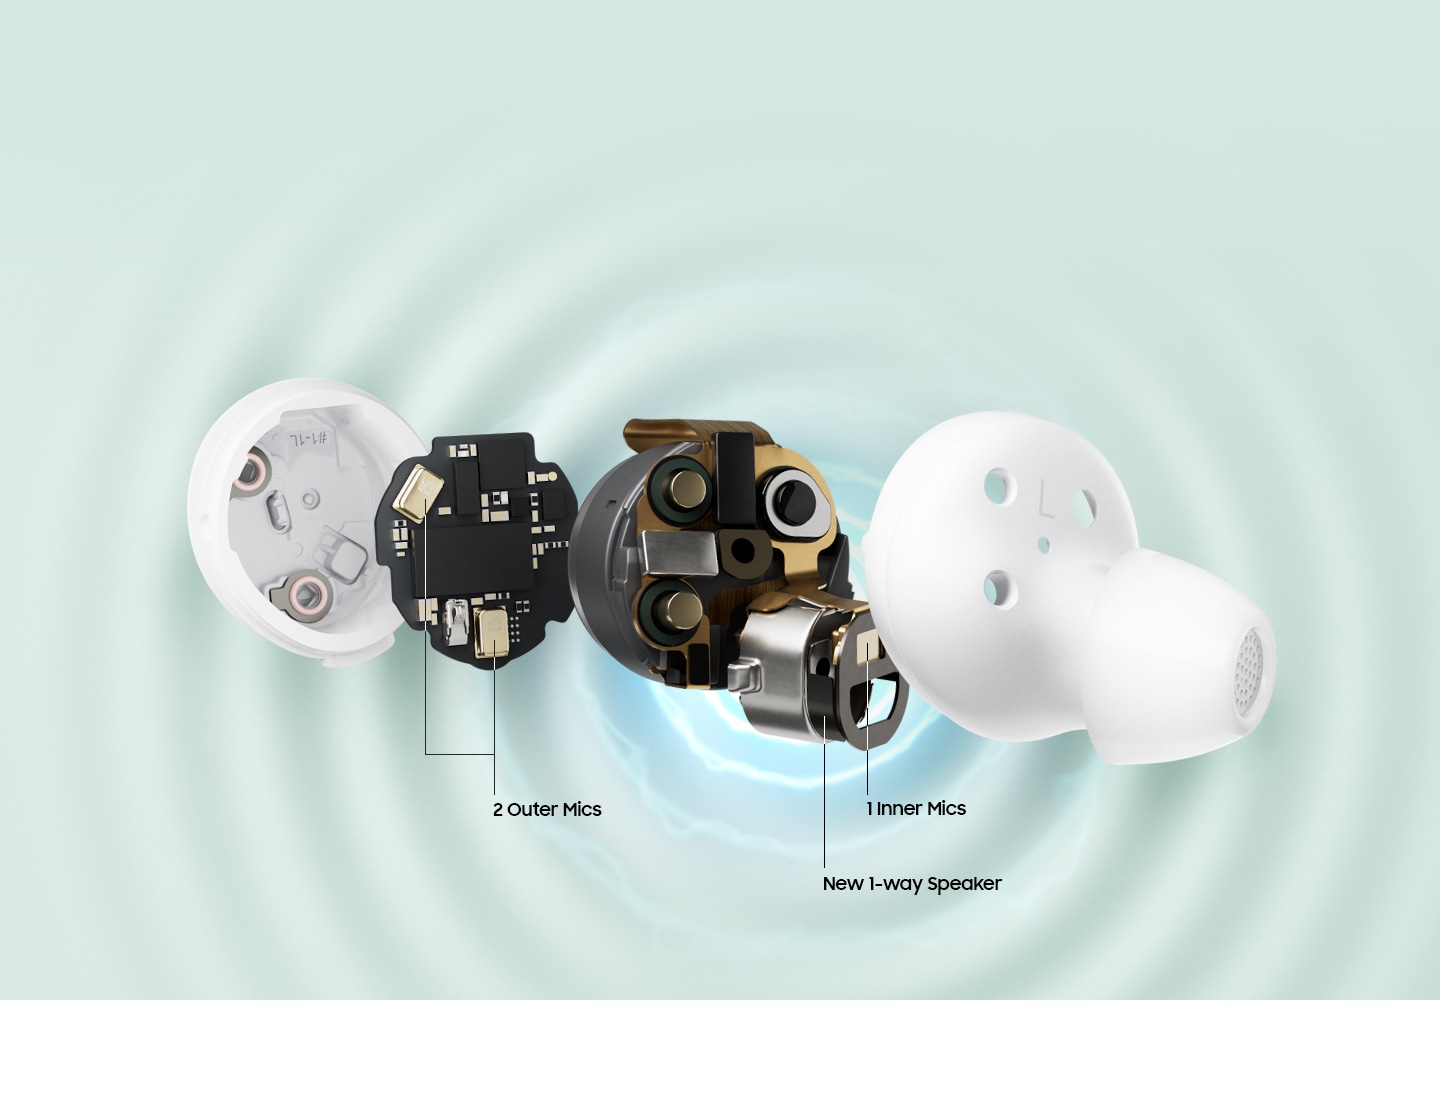 The inside mechanics of Galaxy Buds FE to highlight the new 1-way speaker. Lines denote where 2 outer microphones and 1 inner microphone are located.